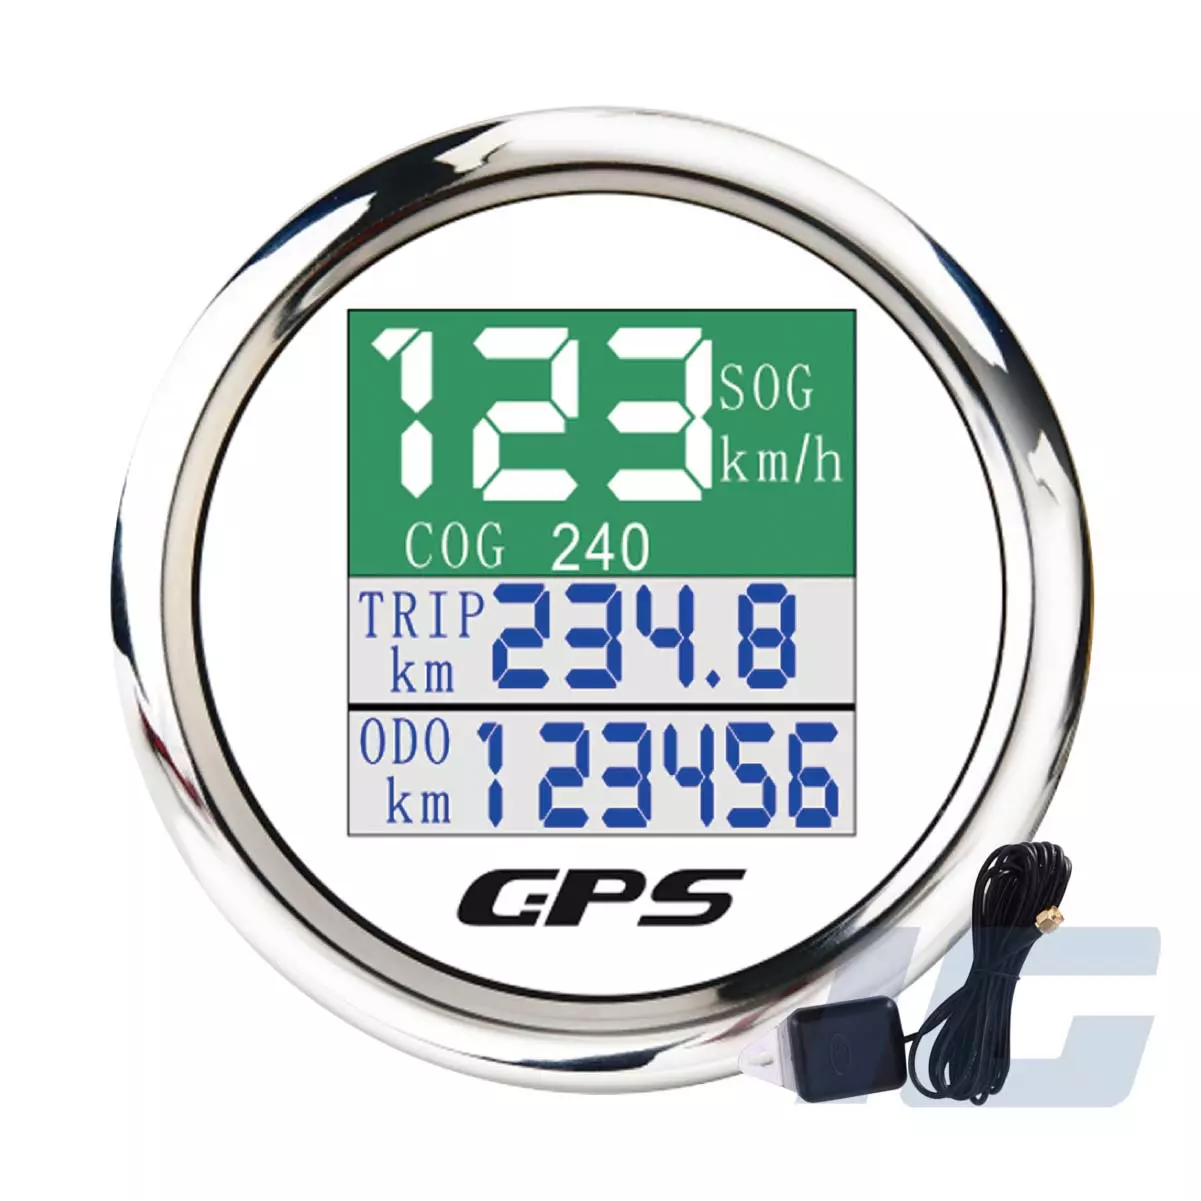 igauge, W Pro, Series, 52mm, White Face, Aftermarket, Marine, Gauge, Boat, Outboard, Speedometer, Kit, GPS, Pitot Tube, Sailboat, mph, kph